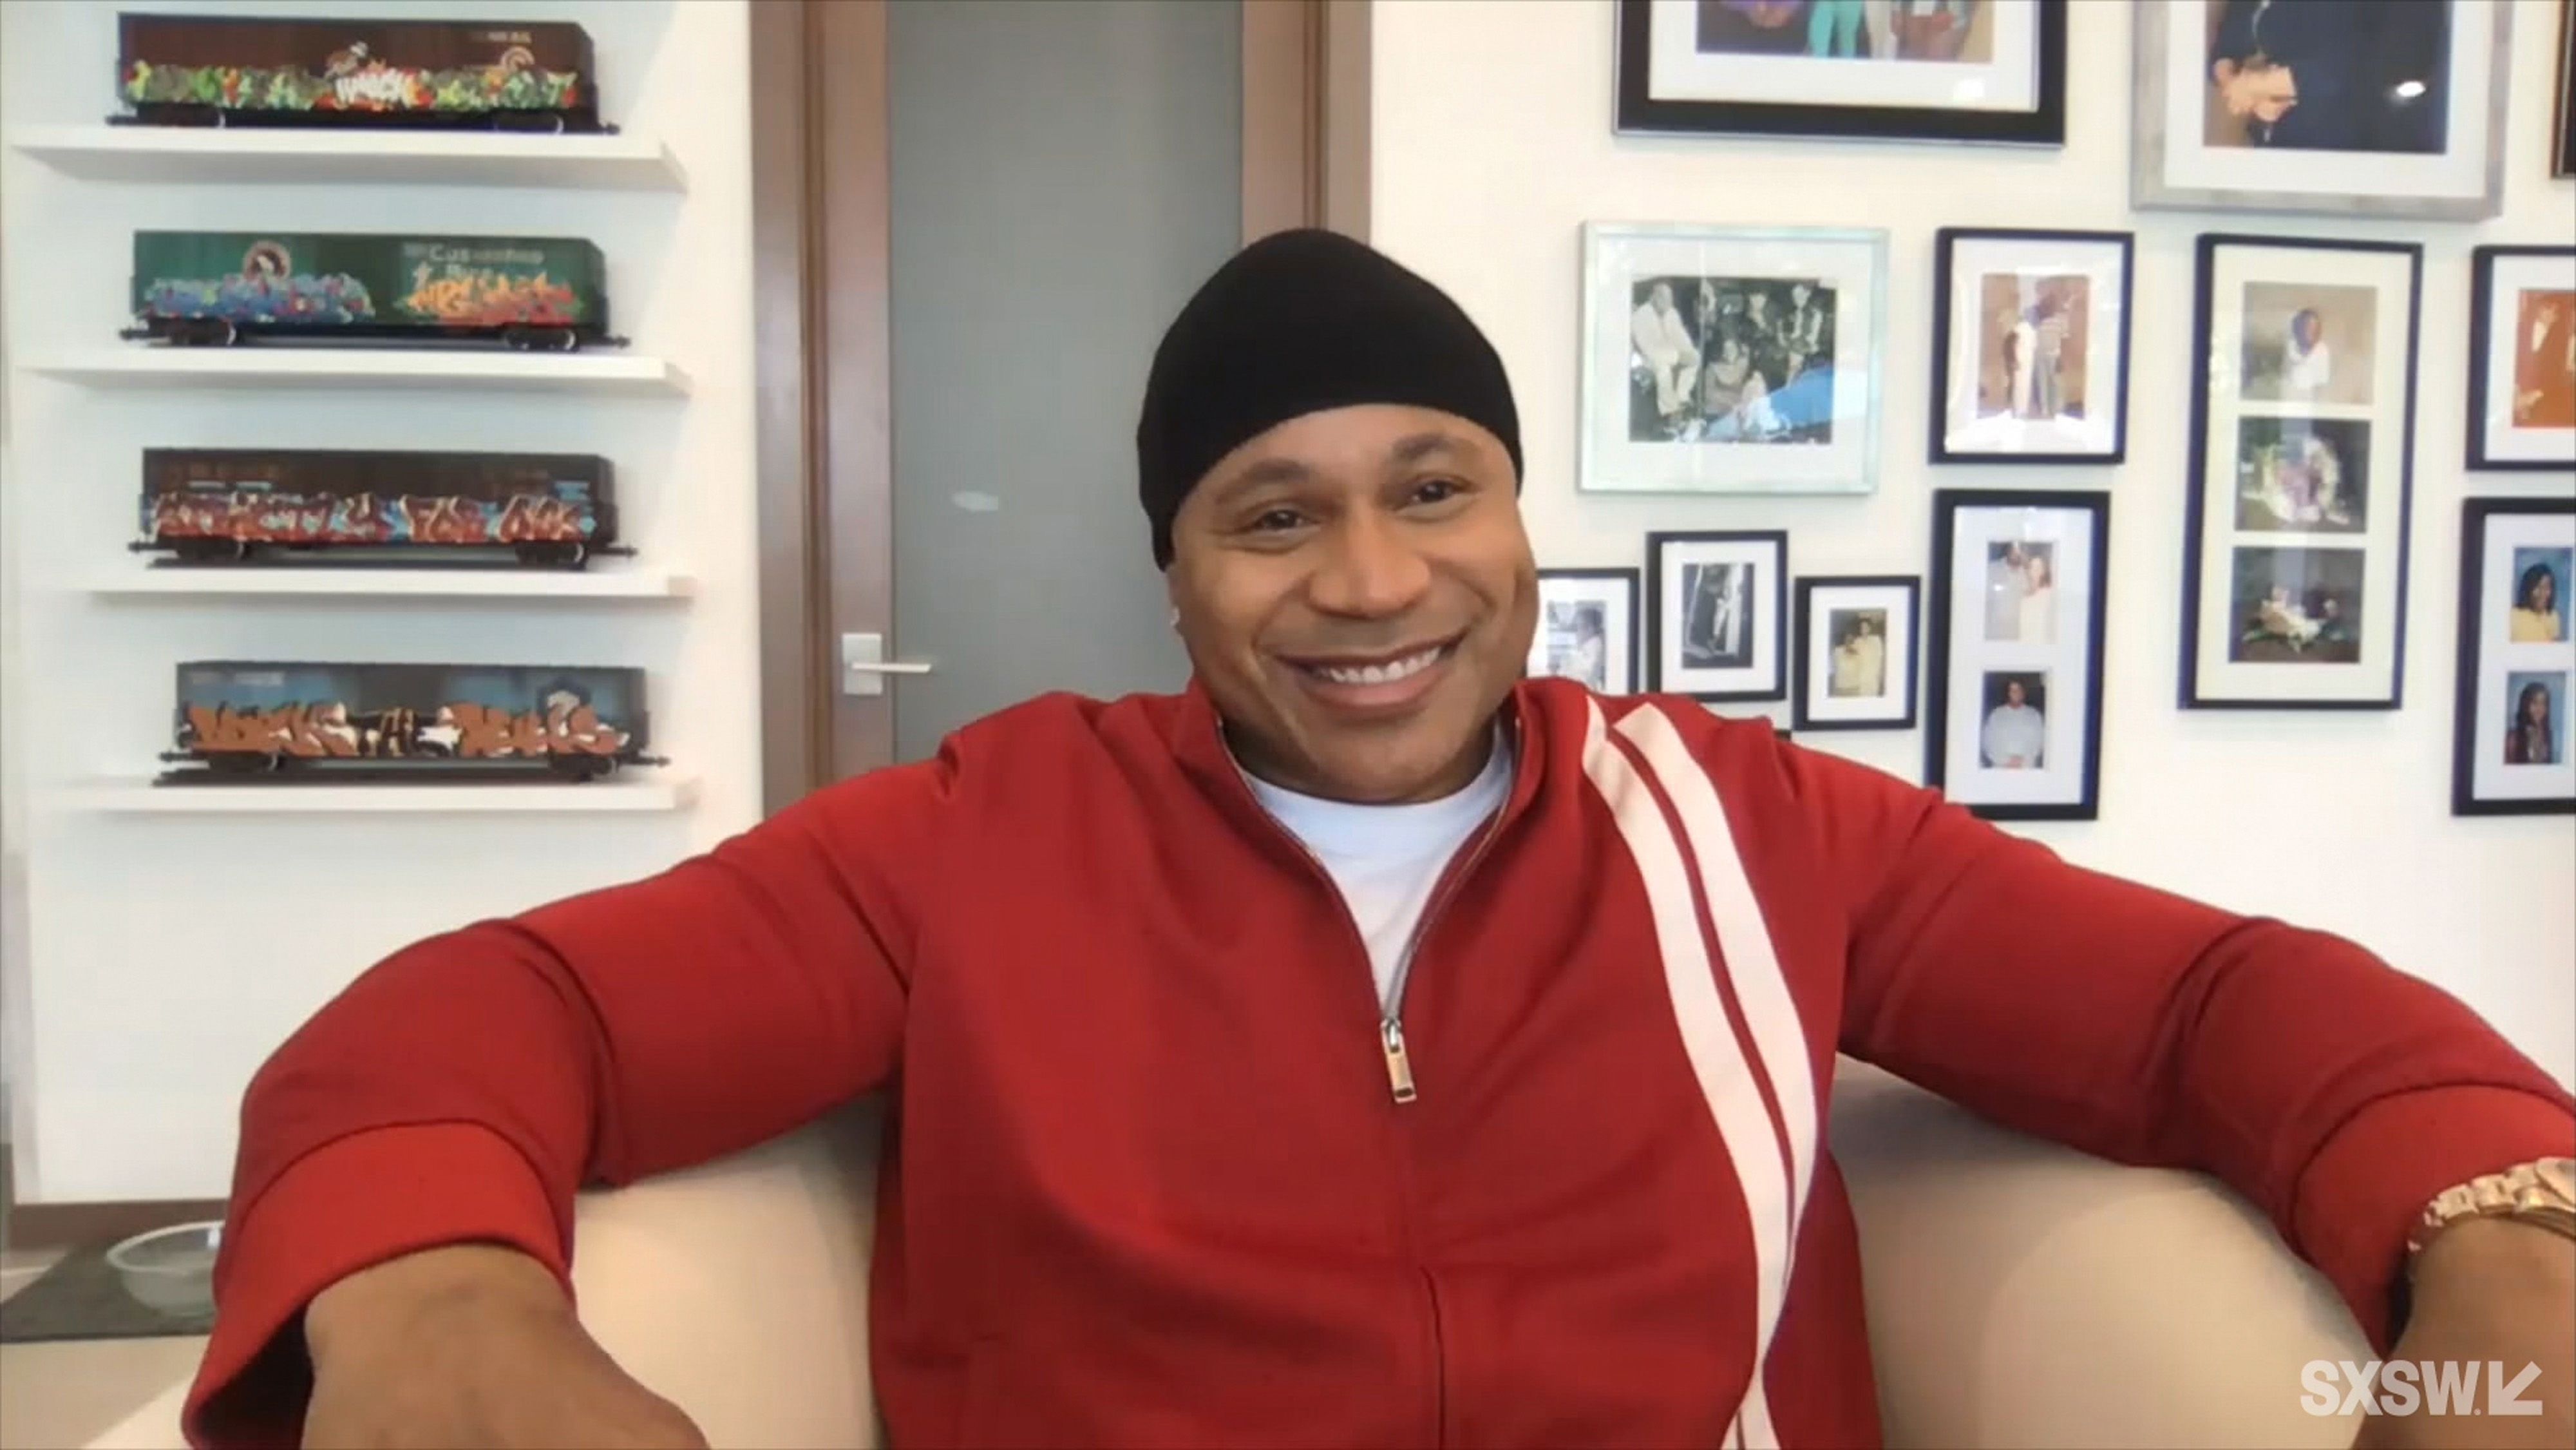 LL Cool J at the online featured session “A Conversation with Icons Queen Latifah and LL Cool J” on March 17, 2021. | Photo: Getty Images